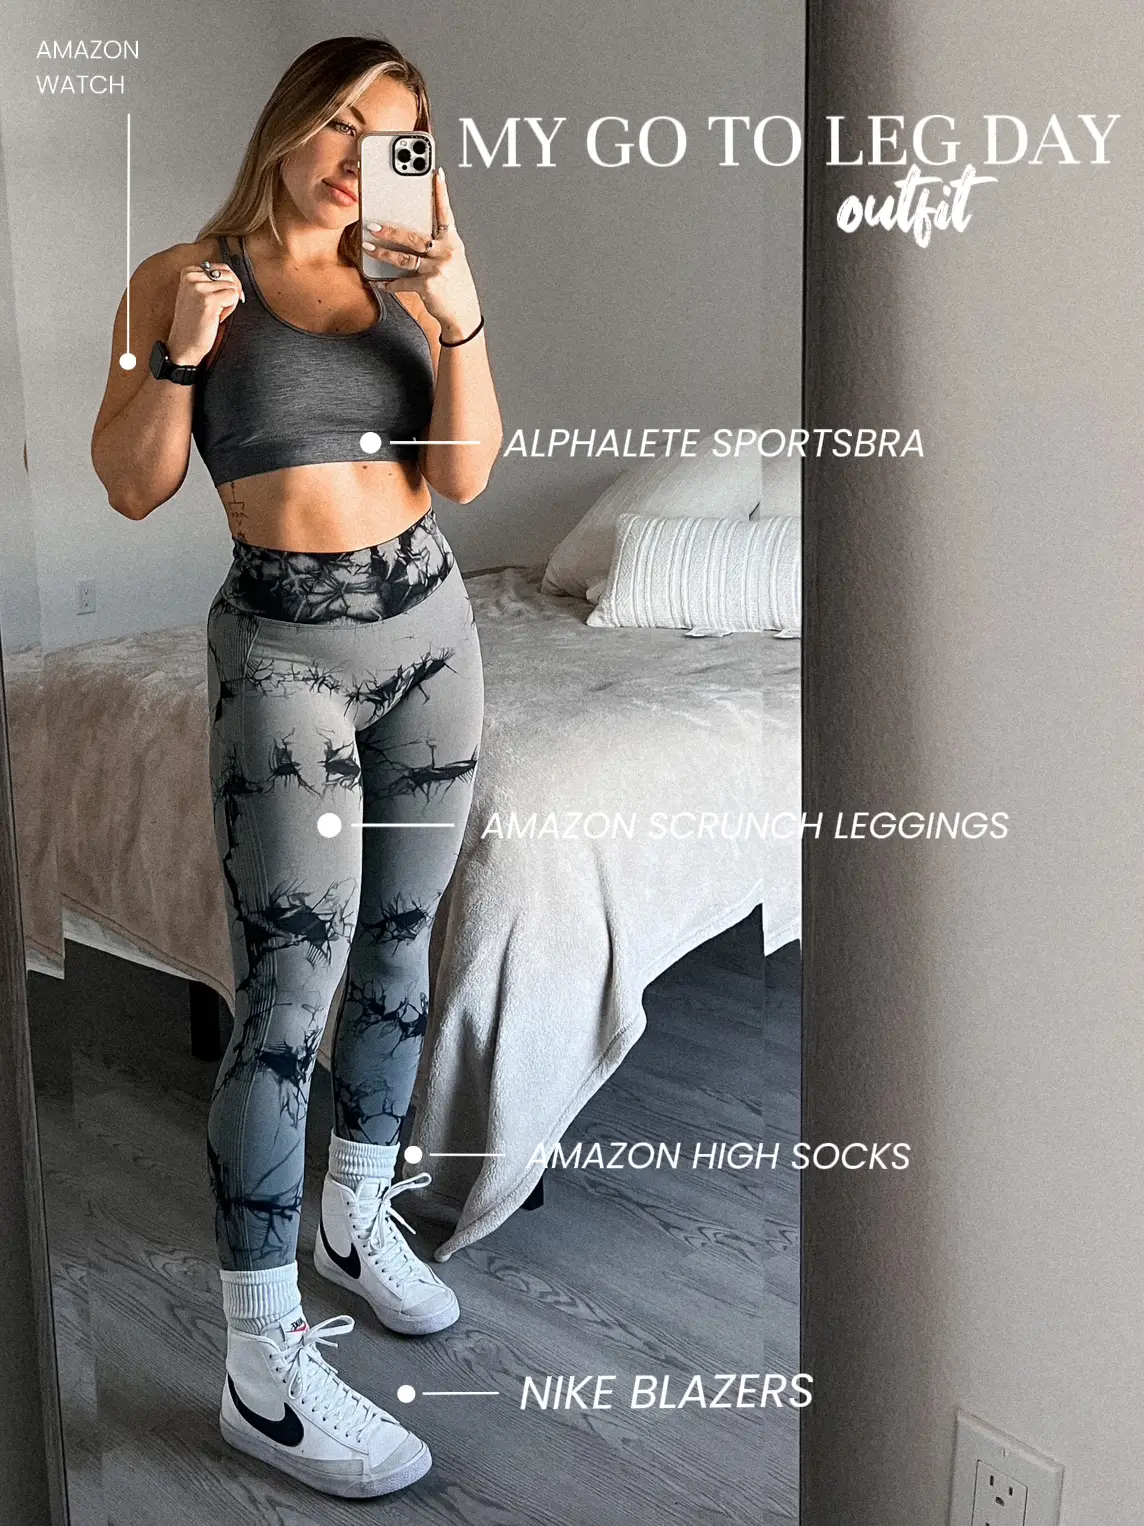 LEG DAY GYM FIT, Gallery posted by Jocelyn Stokely